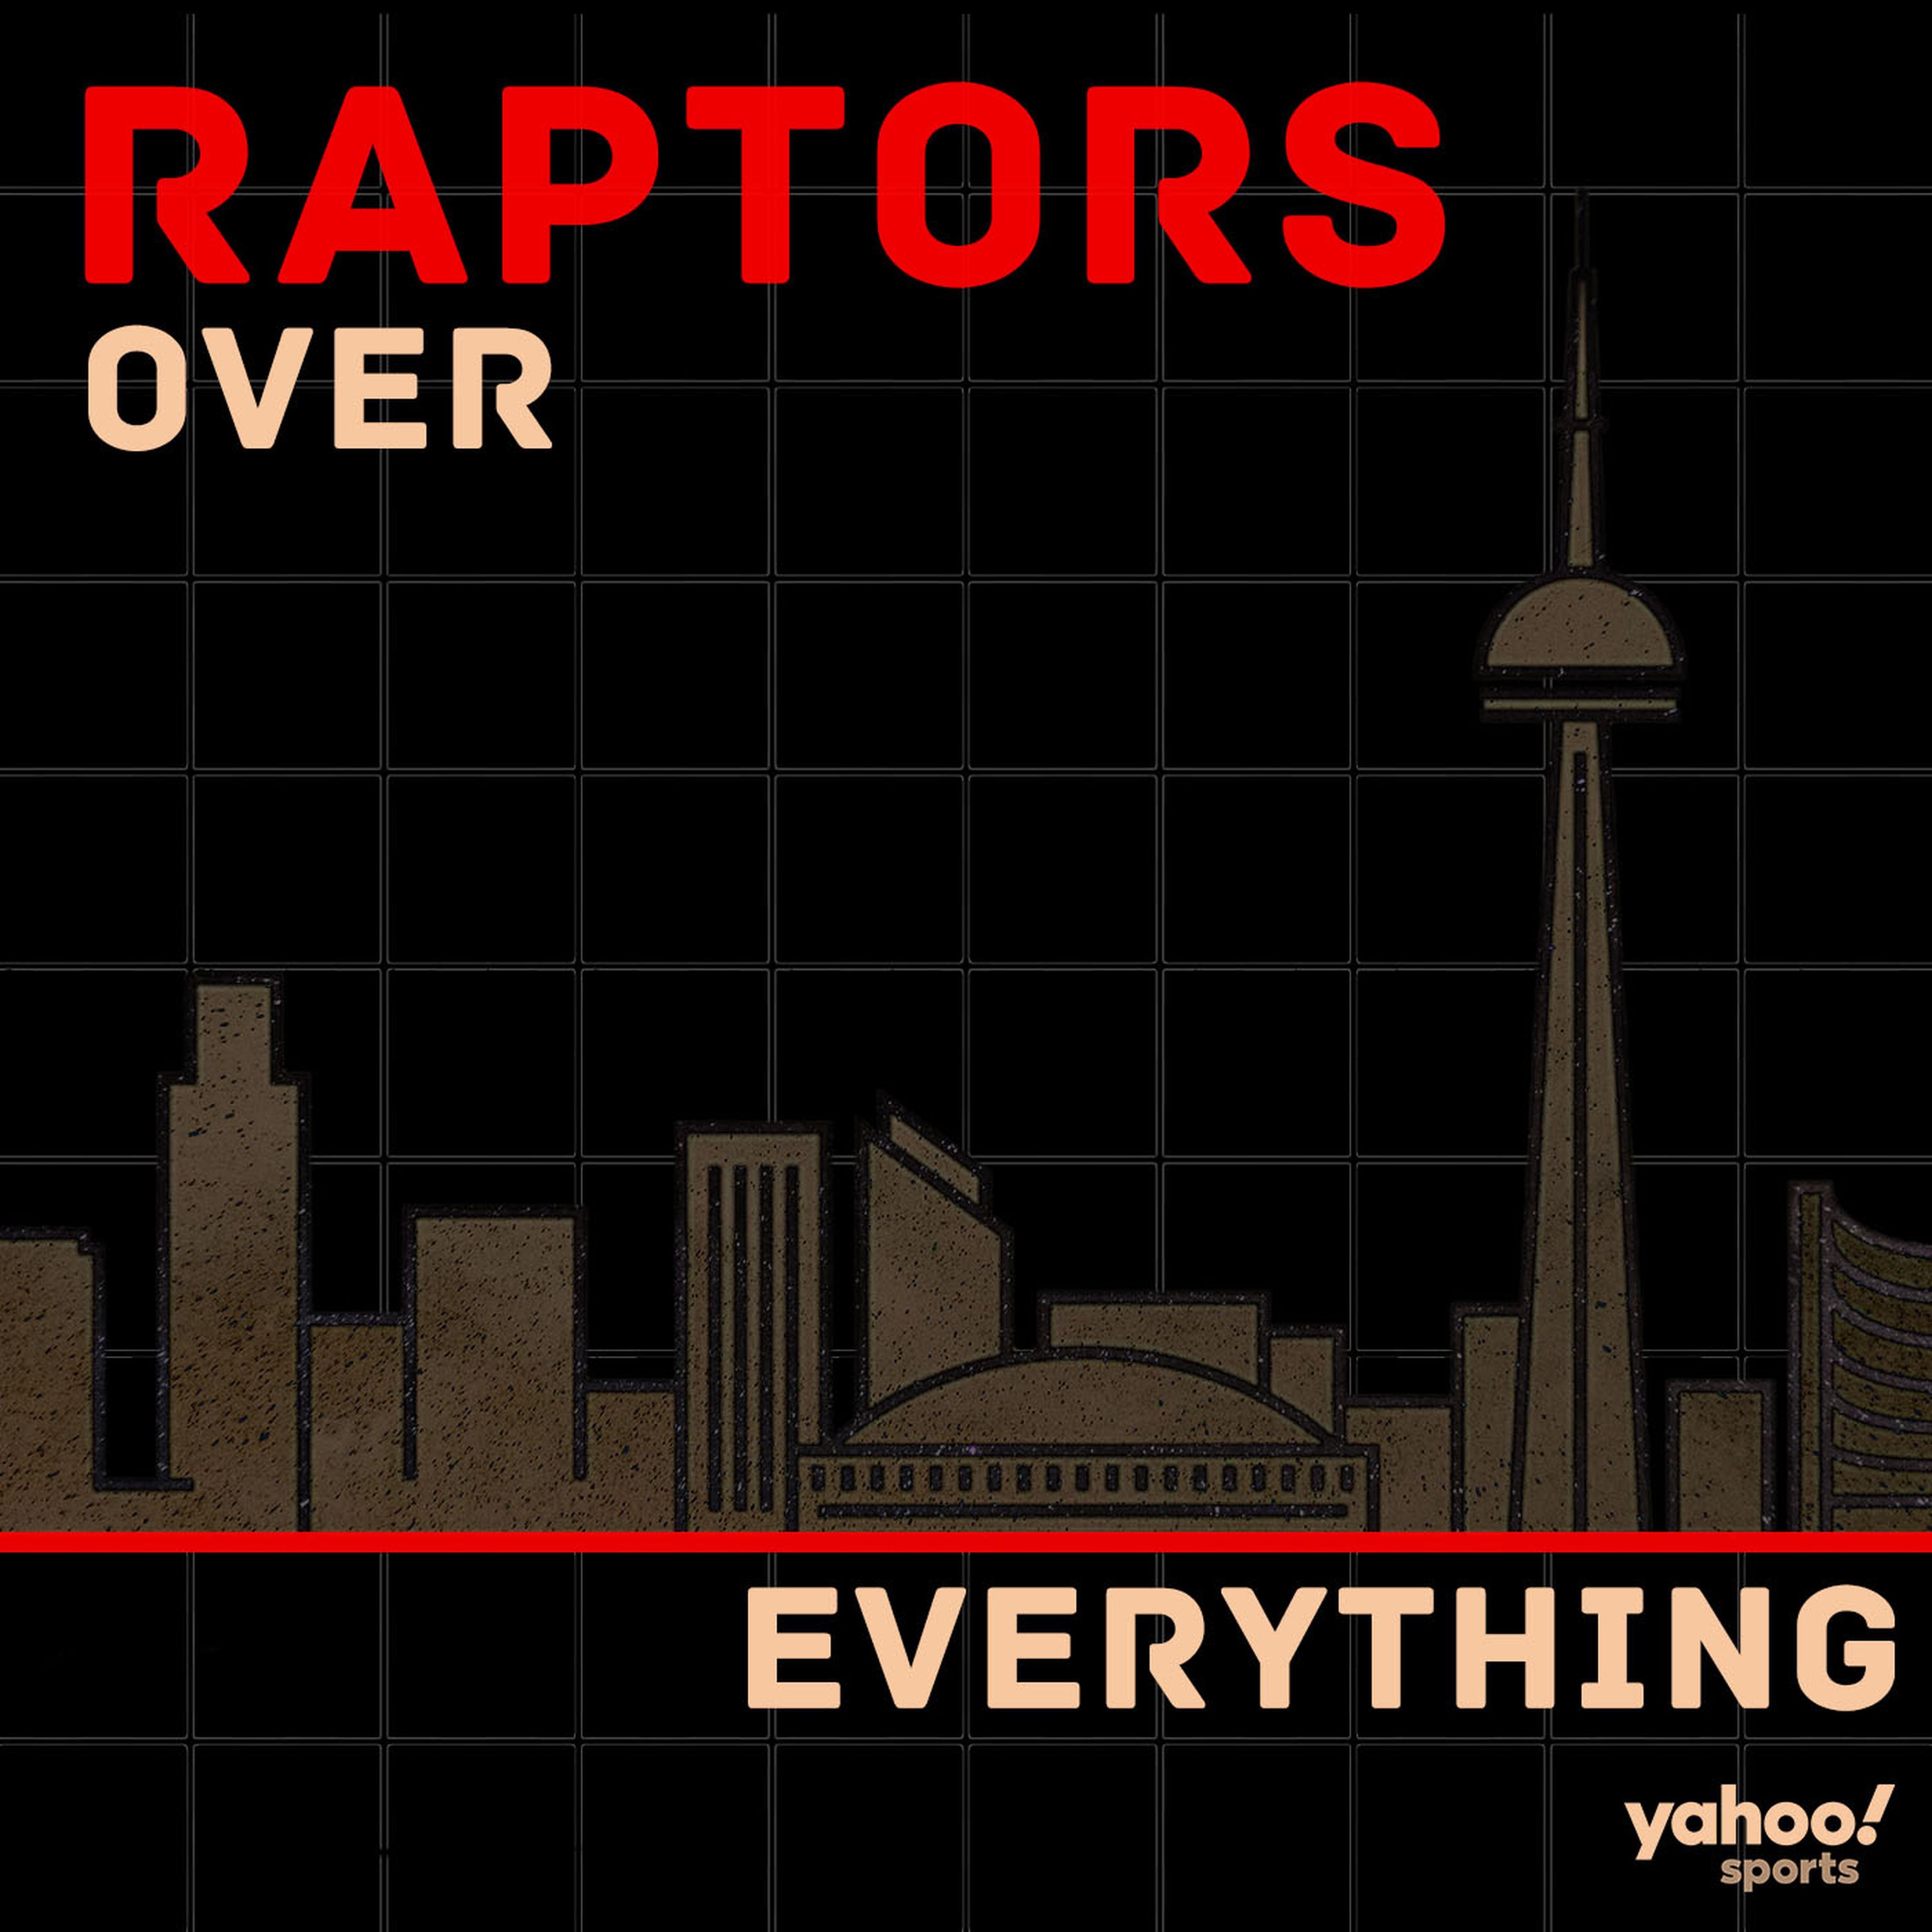 NBA's plans to restart called into question, and what's at stake for the Raptors